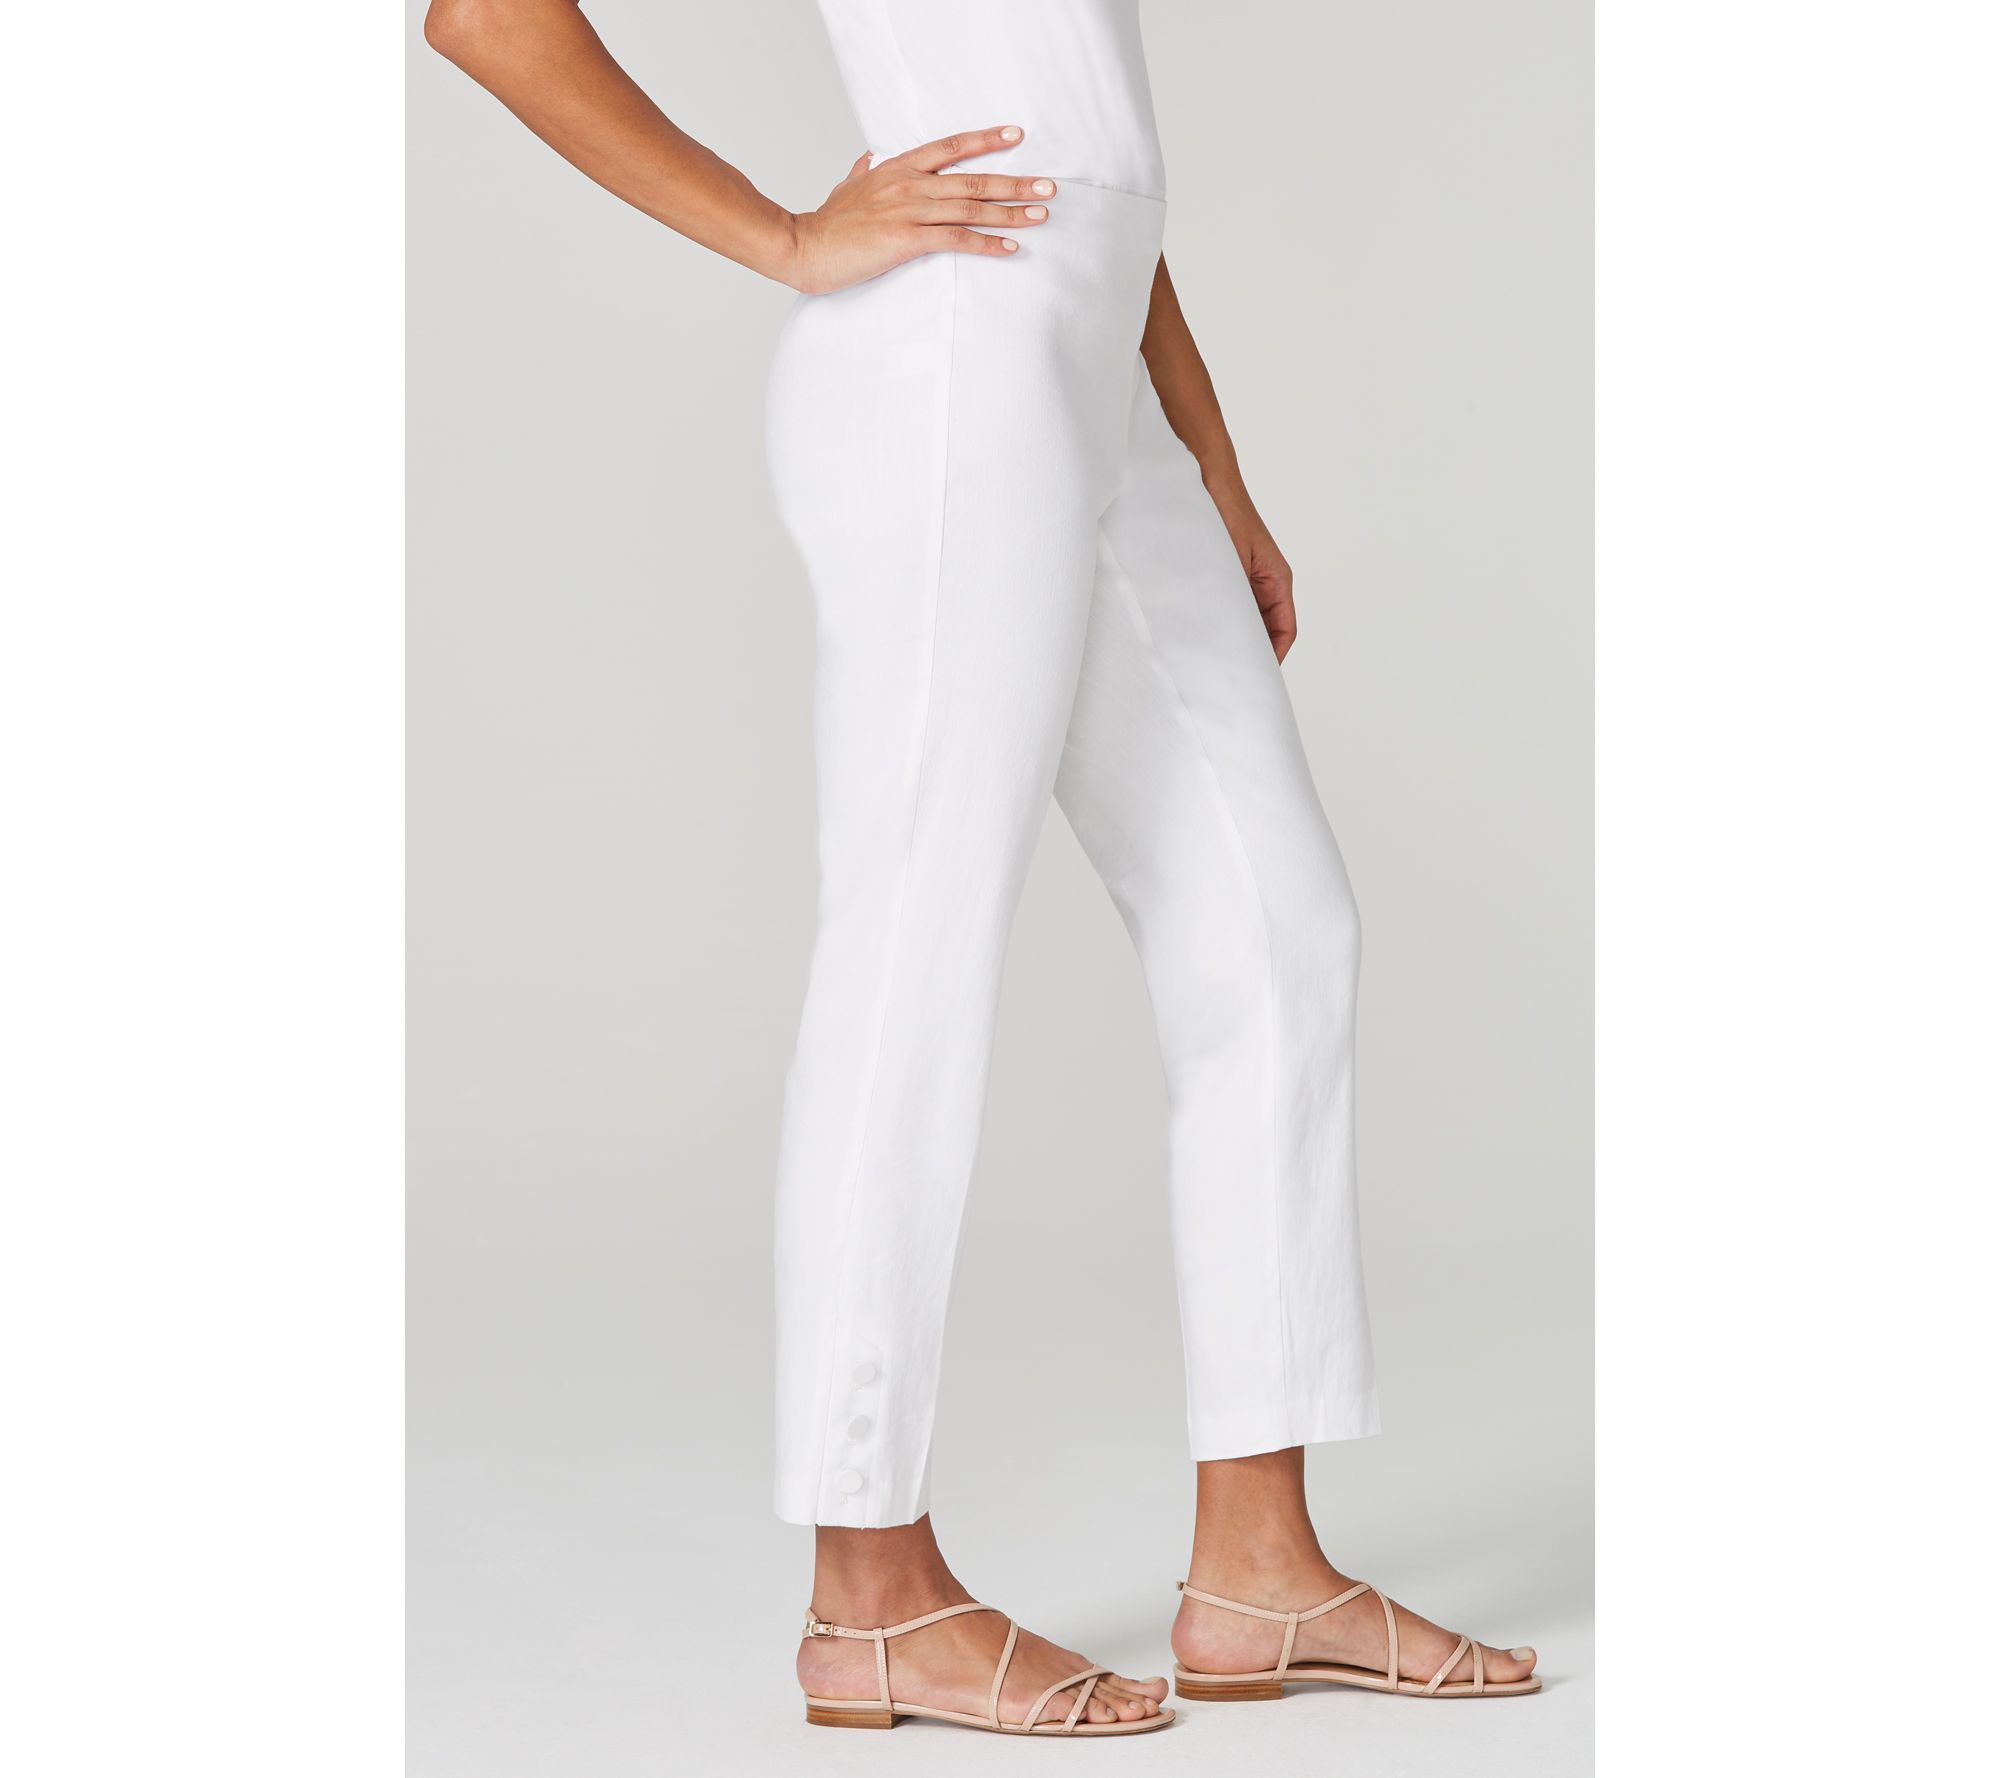 All Sizes New J Jill White Easy Double Cloth Ankle Pants 